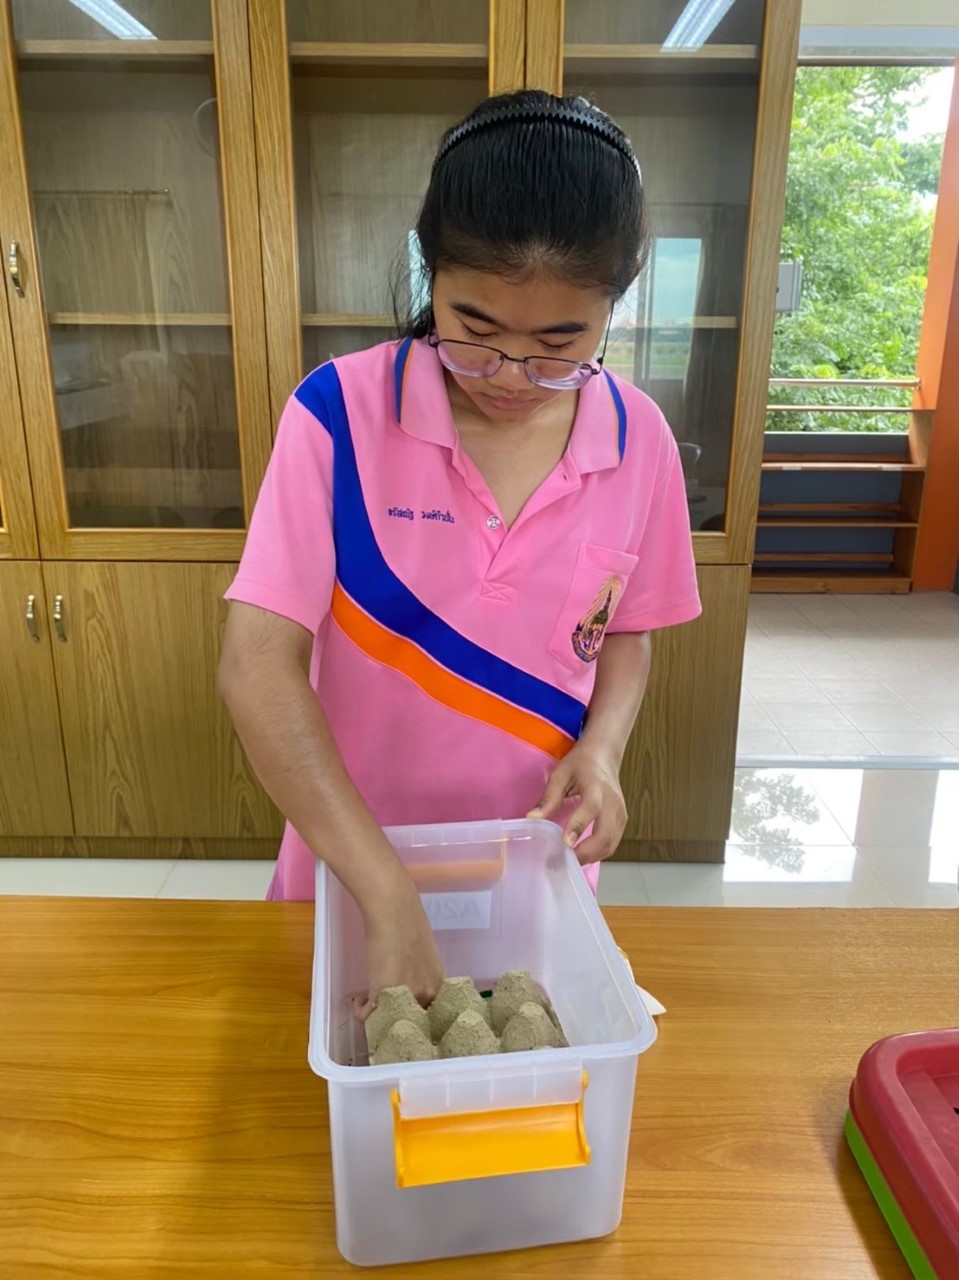 a girl wearing glasses and a pink shirt arranges an egg carton inside a plastic box